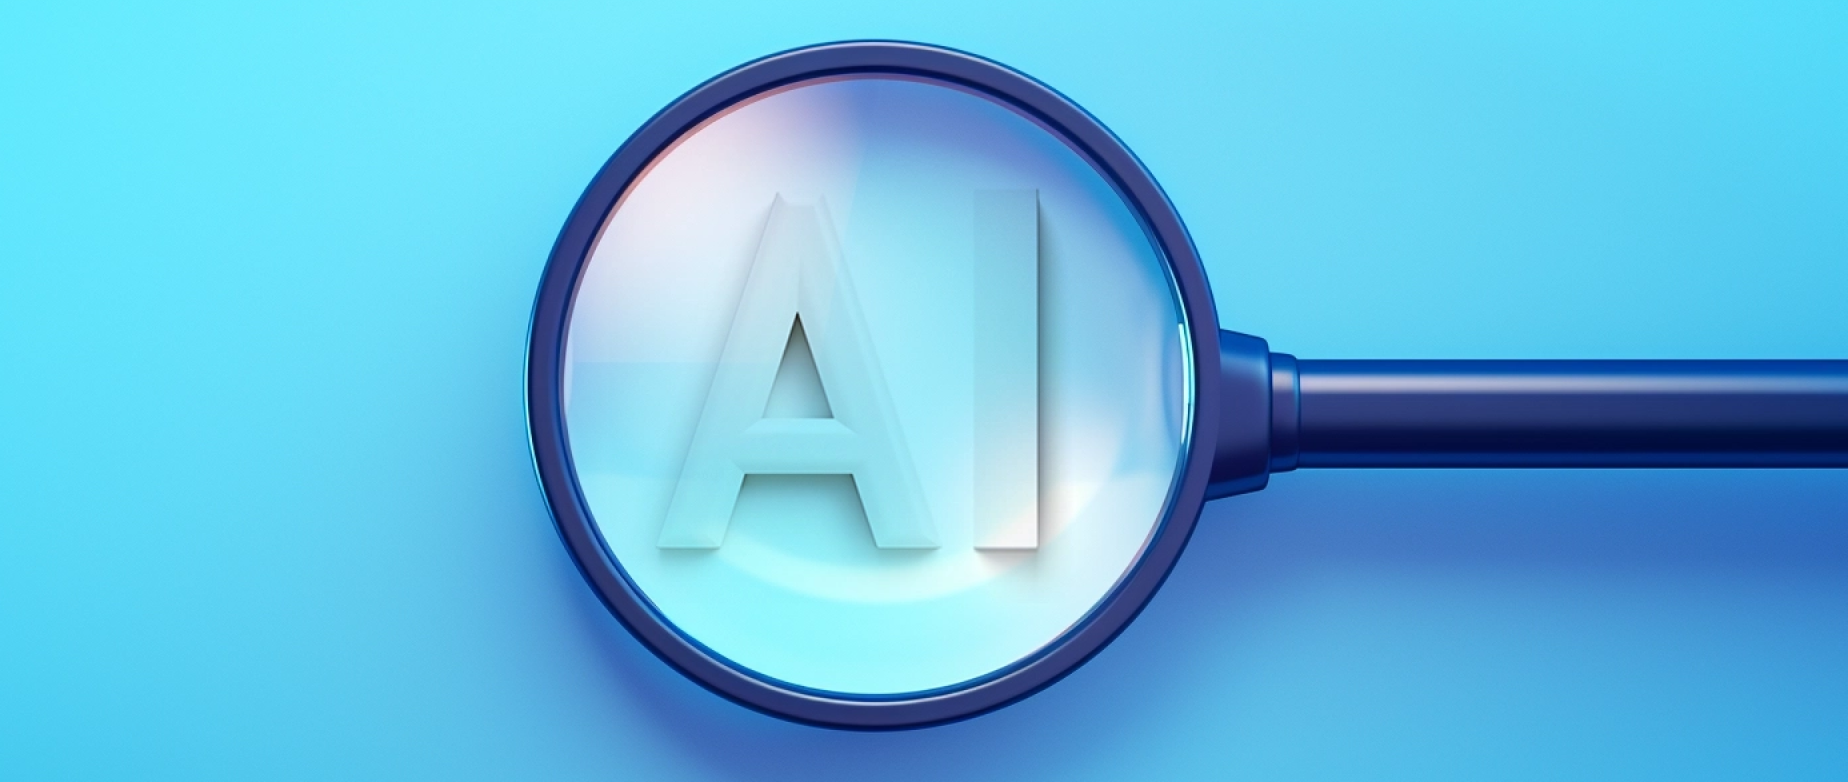 A magnifying glass examining "AI" on a blue background.